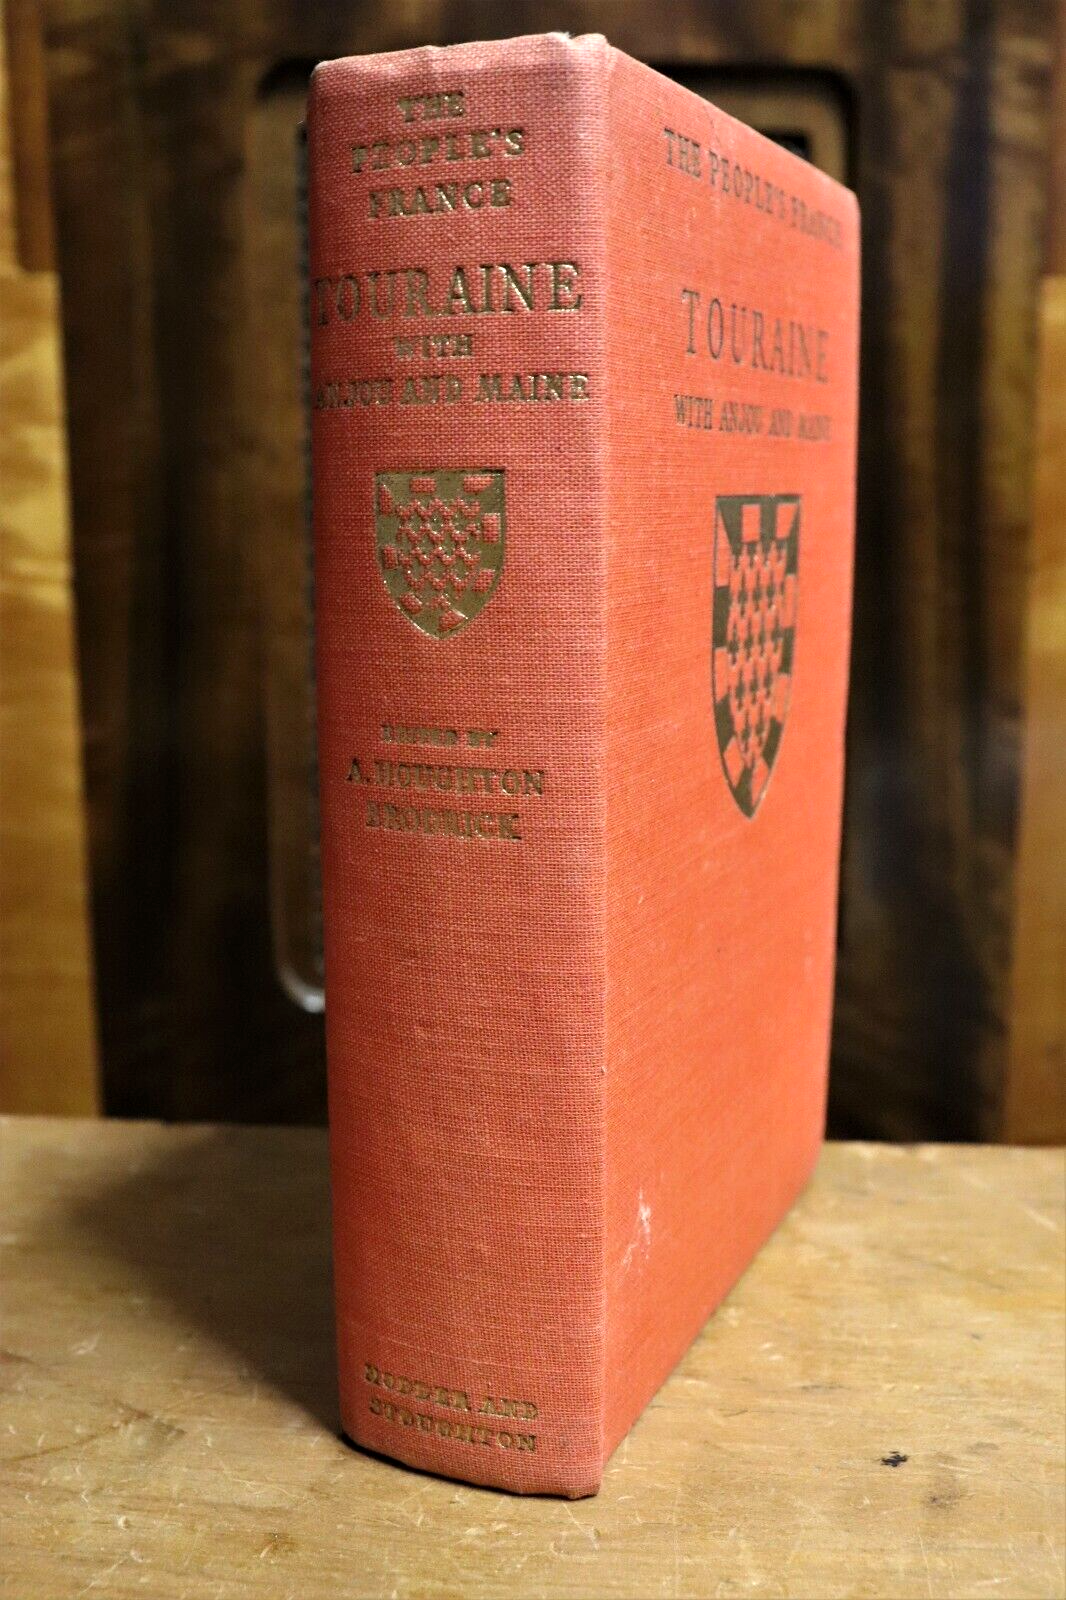 The Peoples France: Touraine - 1948 - 1st Edition Antique French Travel Book